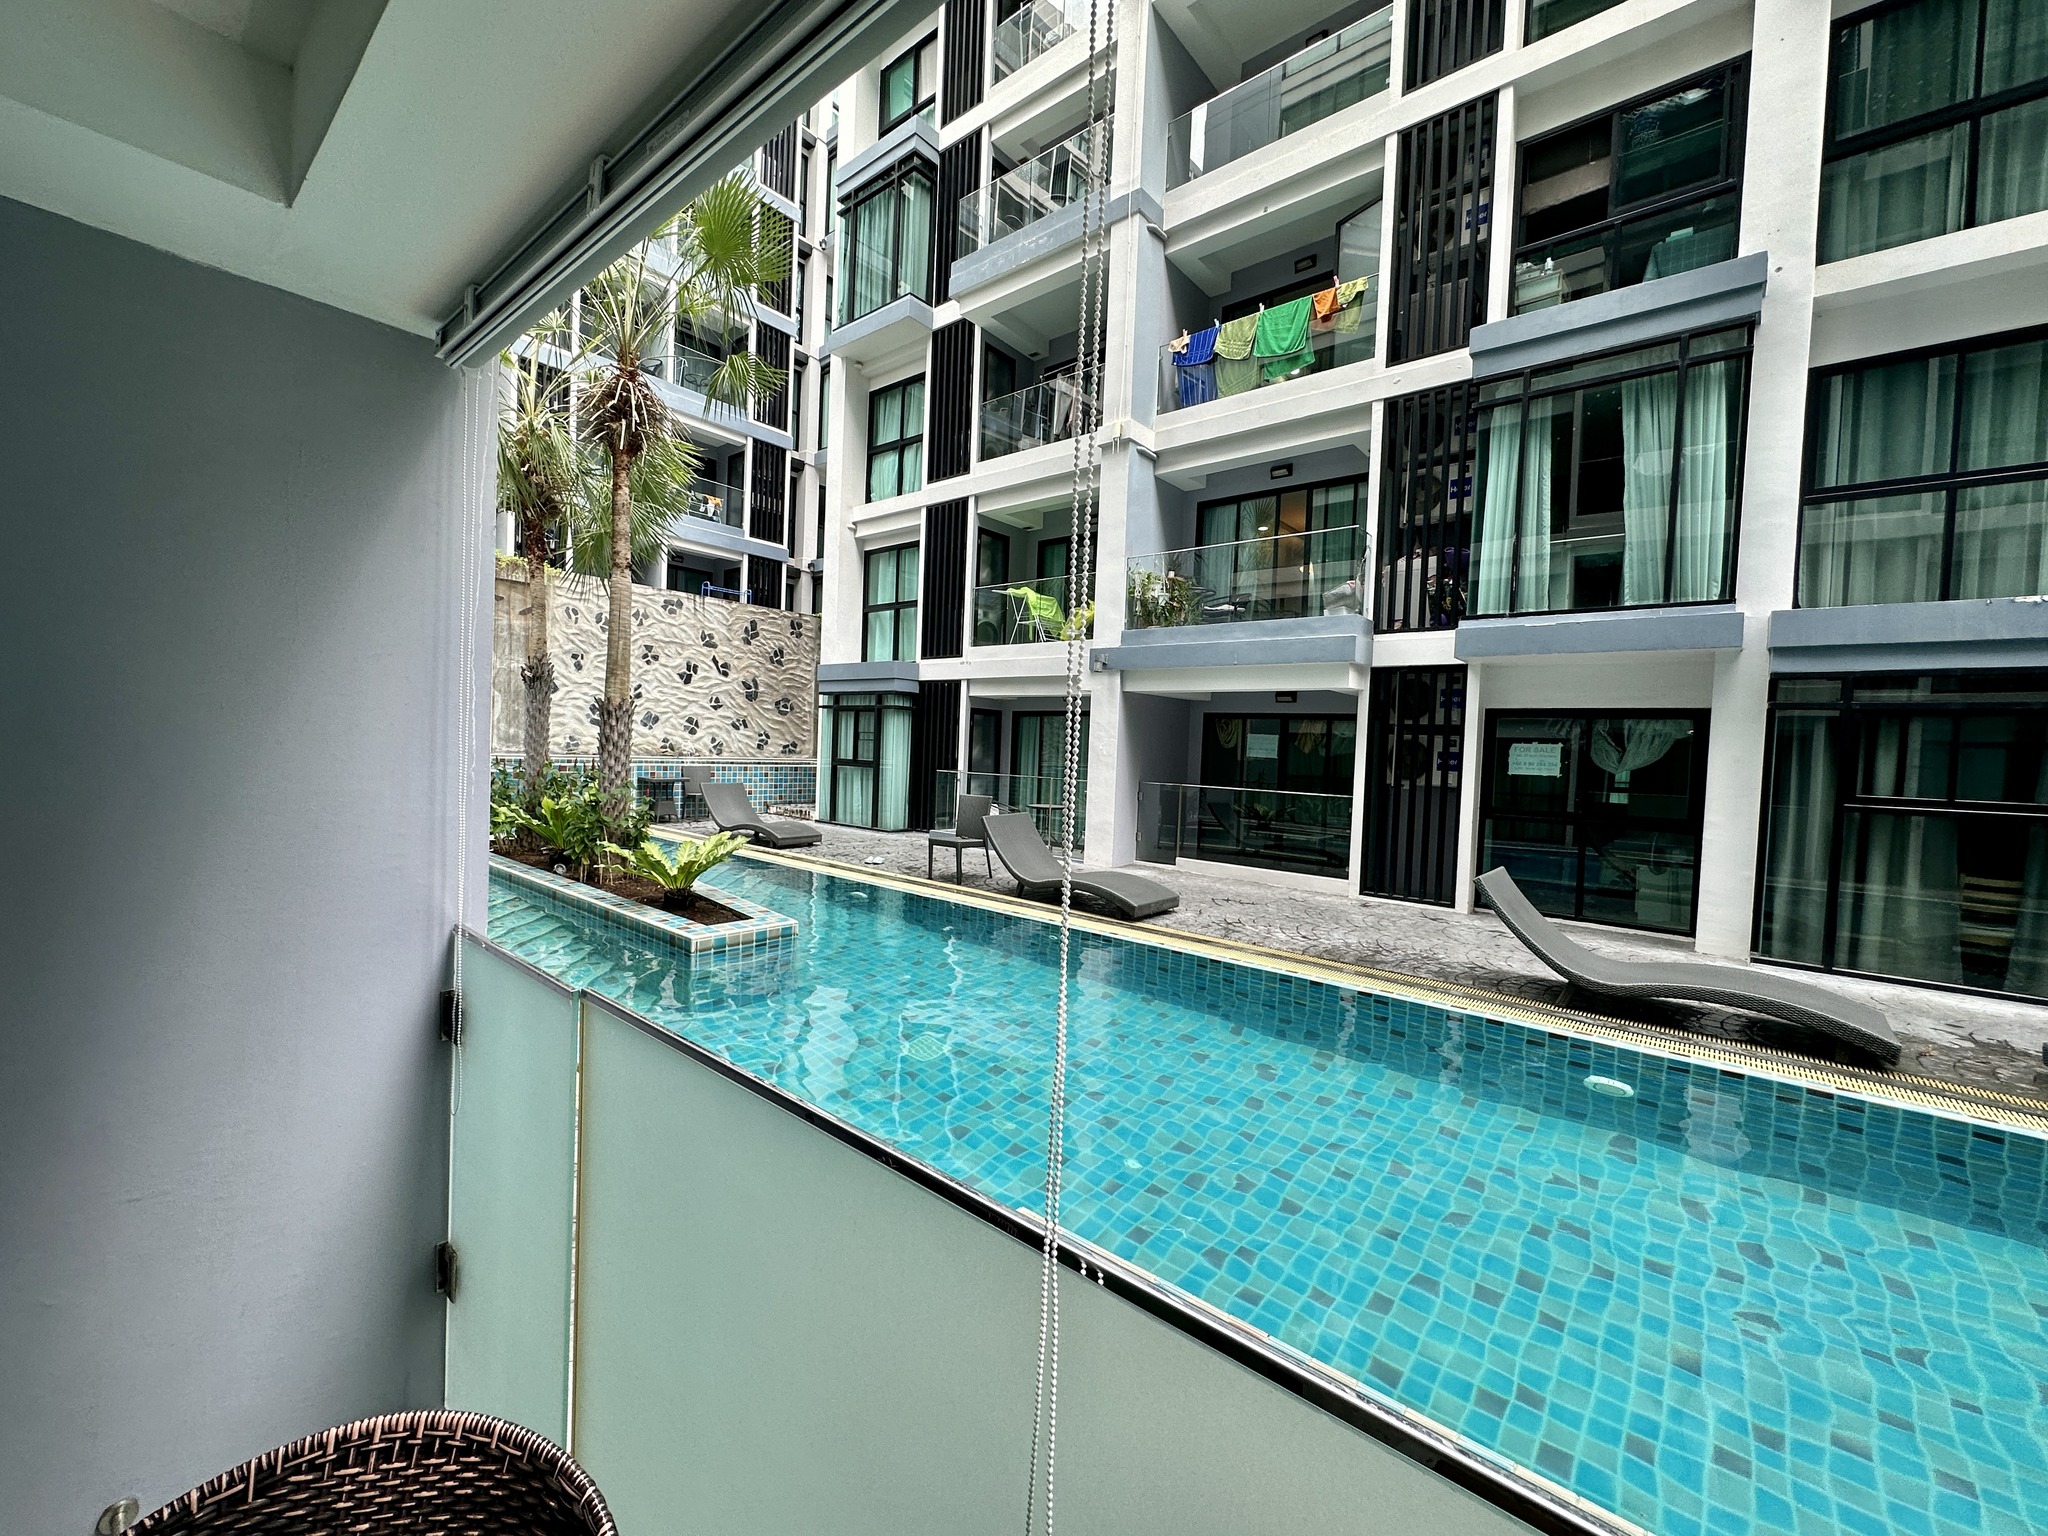 Siam Oriental Tropical Garden. 1 bedroom, 400 meters from the beach. Pool access